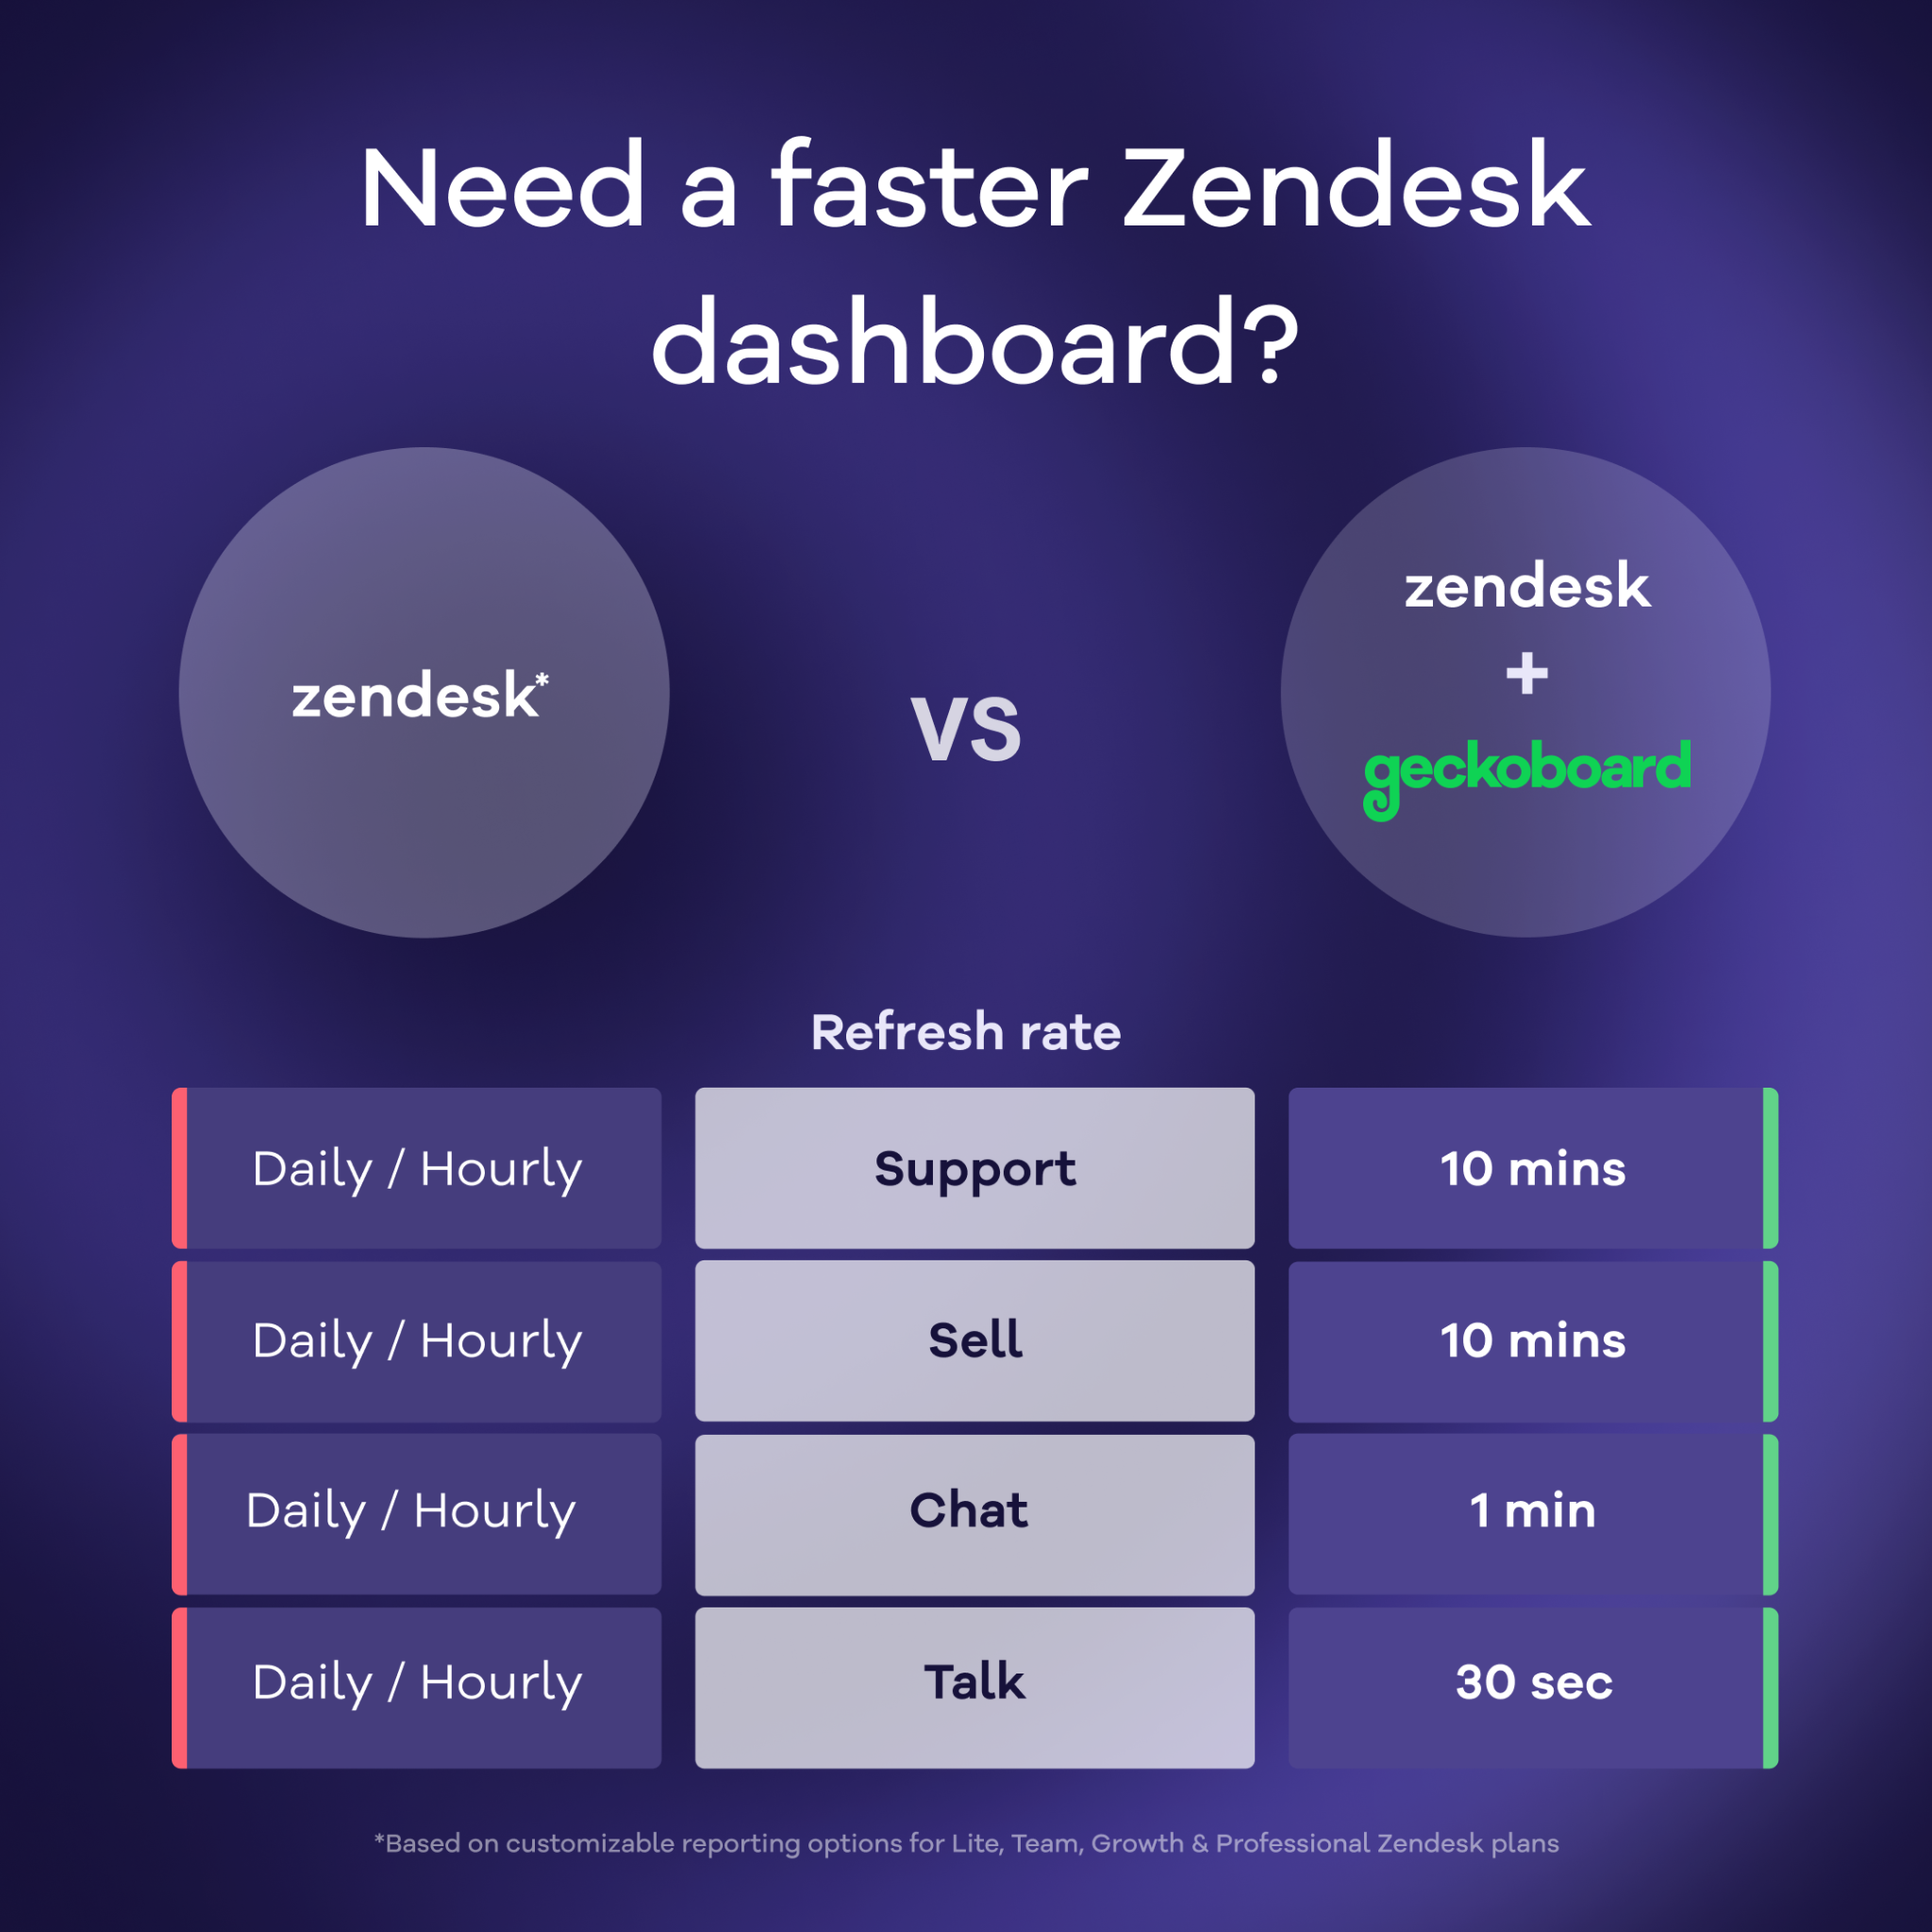 Refresh rate comparison for Zendesk and Geckobaord 